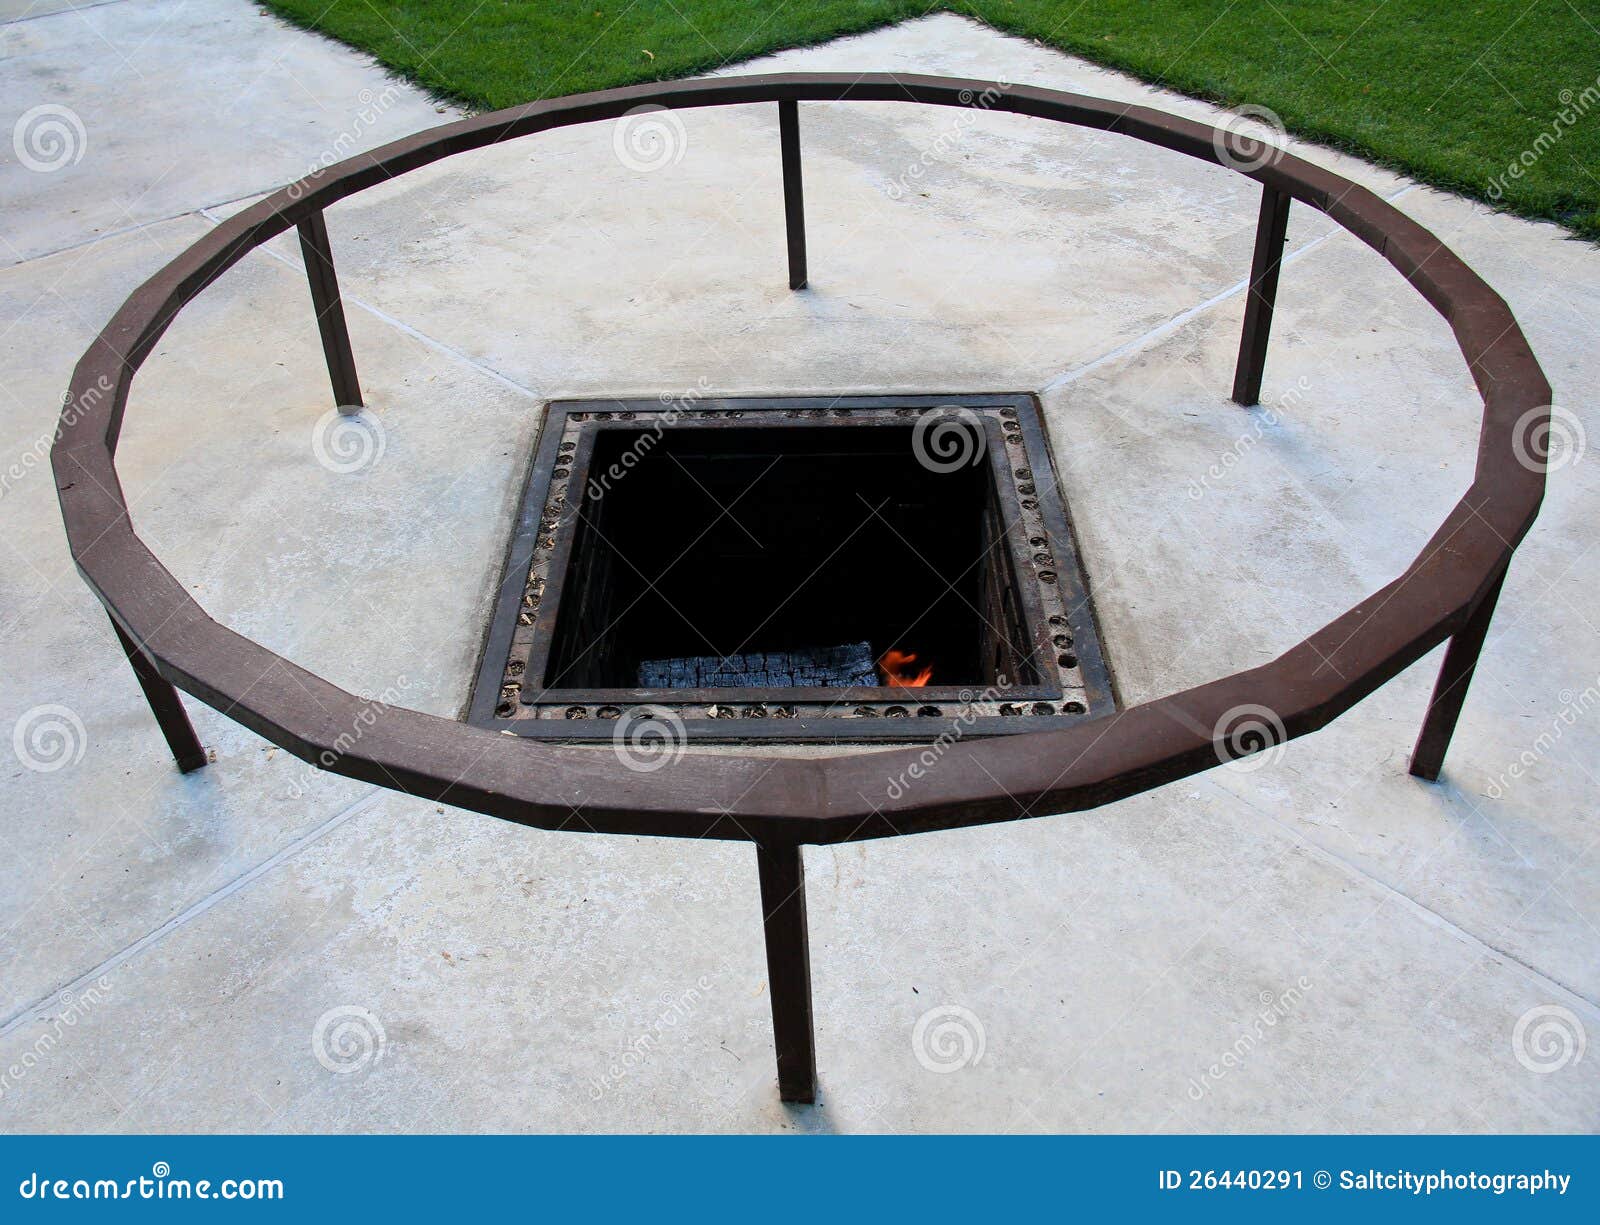 BBQ FIre Pit - Charcoal Grill Ring Portable 32